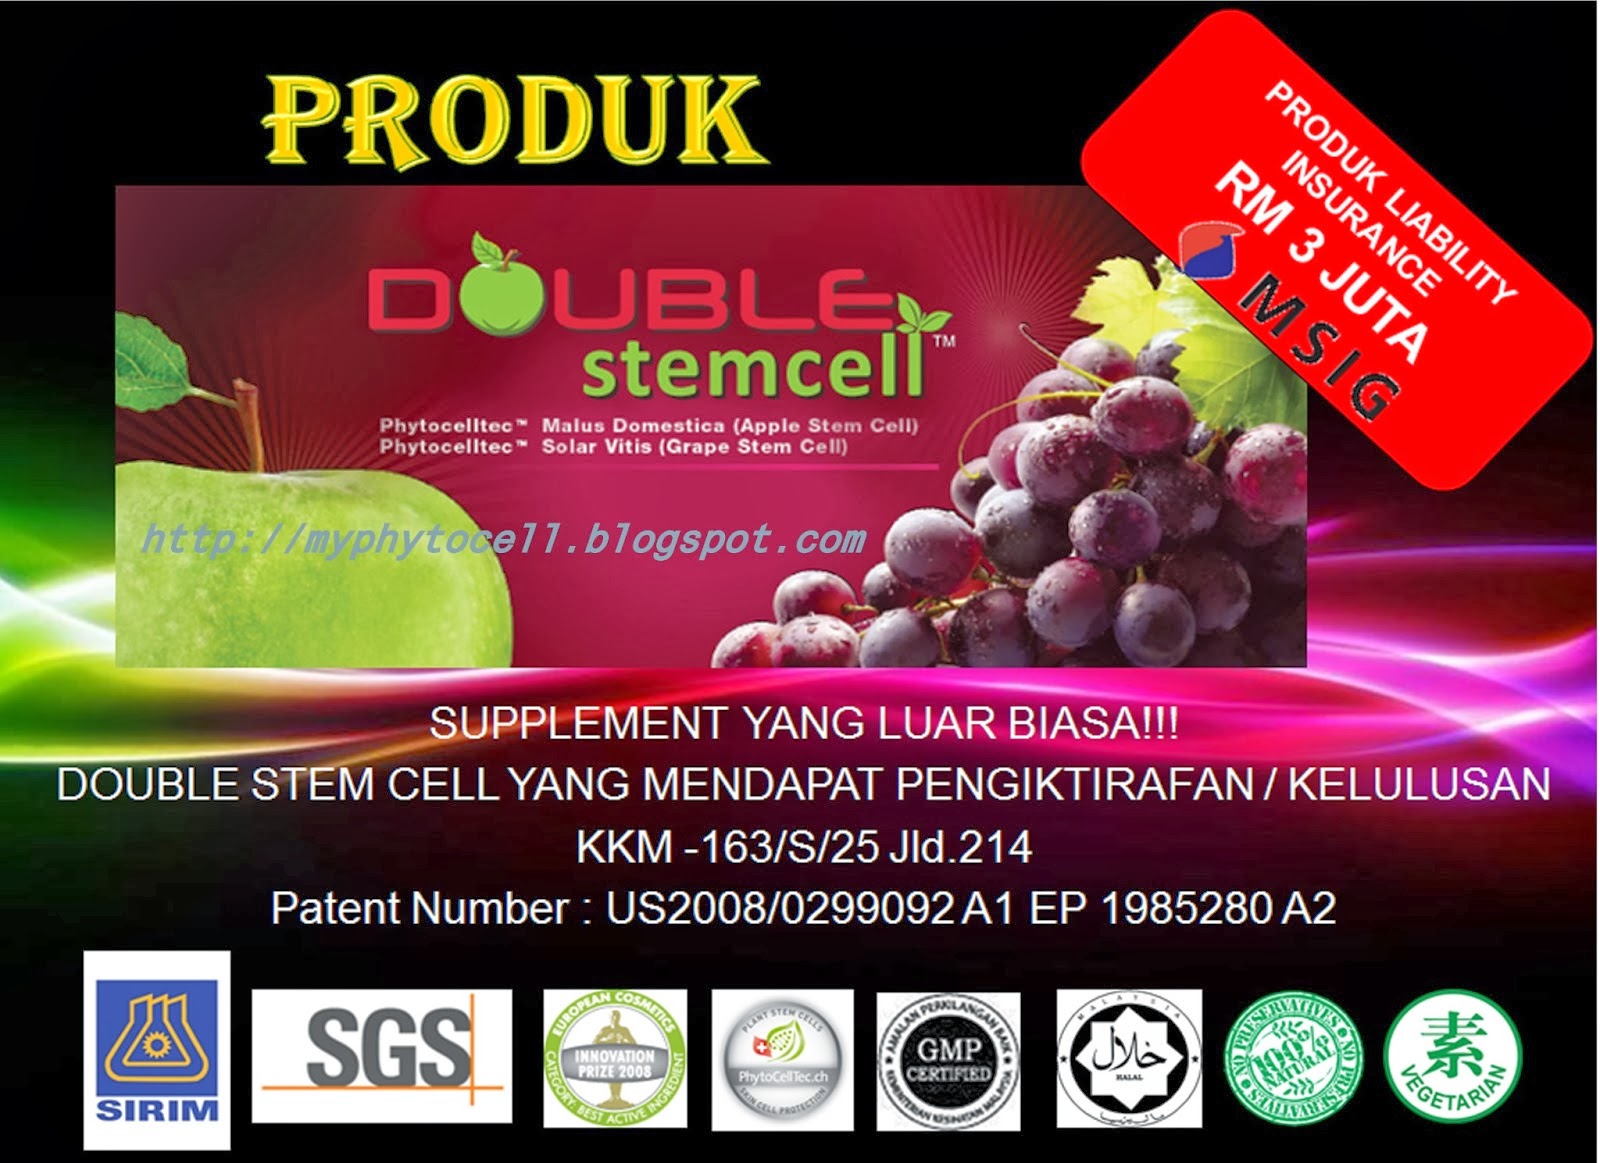 DOUBLESTEM CELL CLICK PICTURE, FREE MEMBER, INDONESIA, THAILAND, SINGAPORE & VIATNAM + DELIVERY